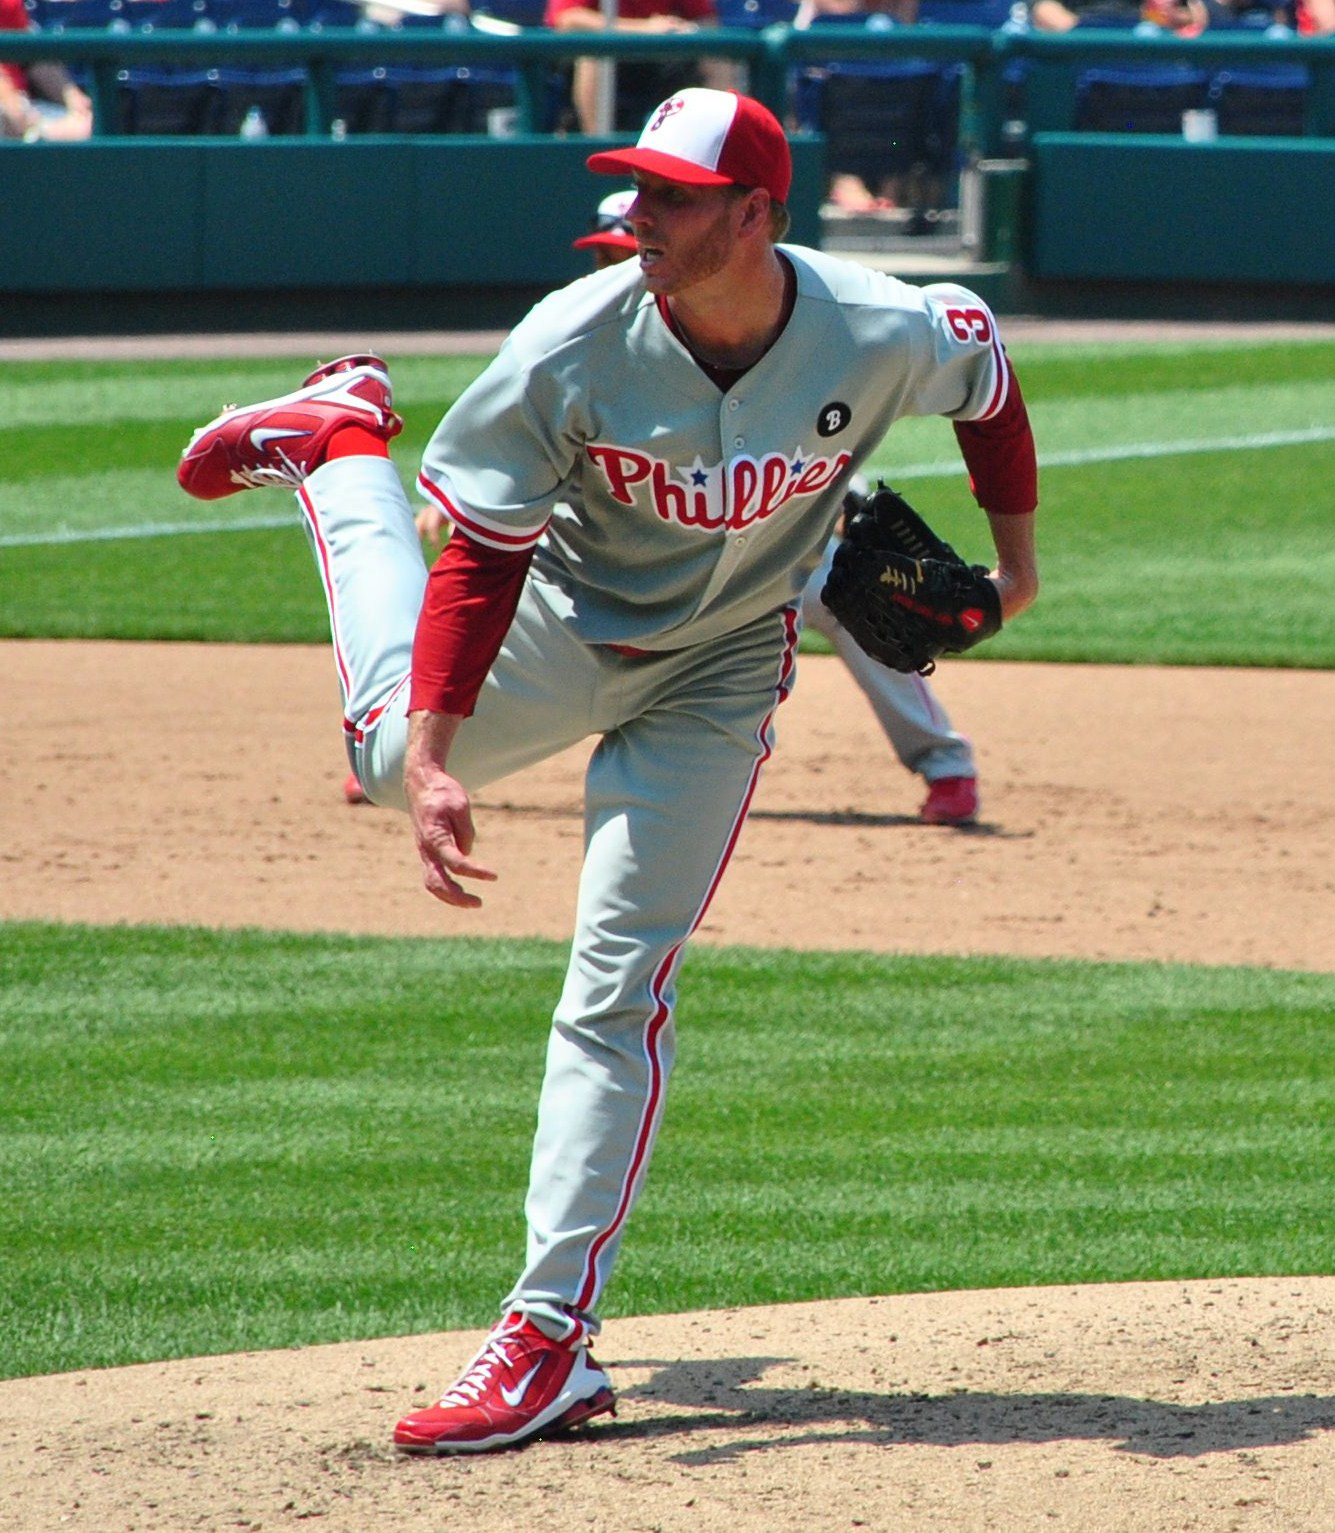 Courtesy of Wikimedia Commons Roy Halladay fires from the mound. A resurgent year from Halladay could do wonders for an aging Phillies team.